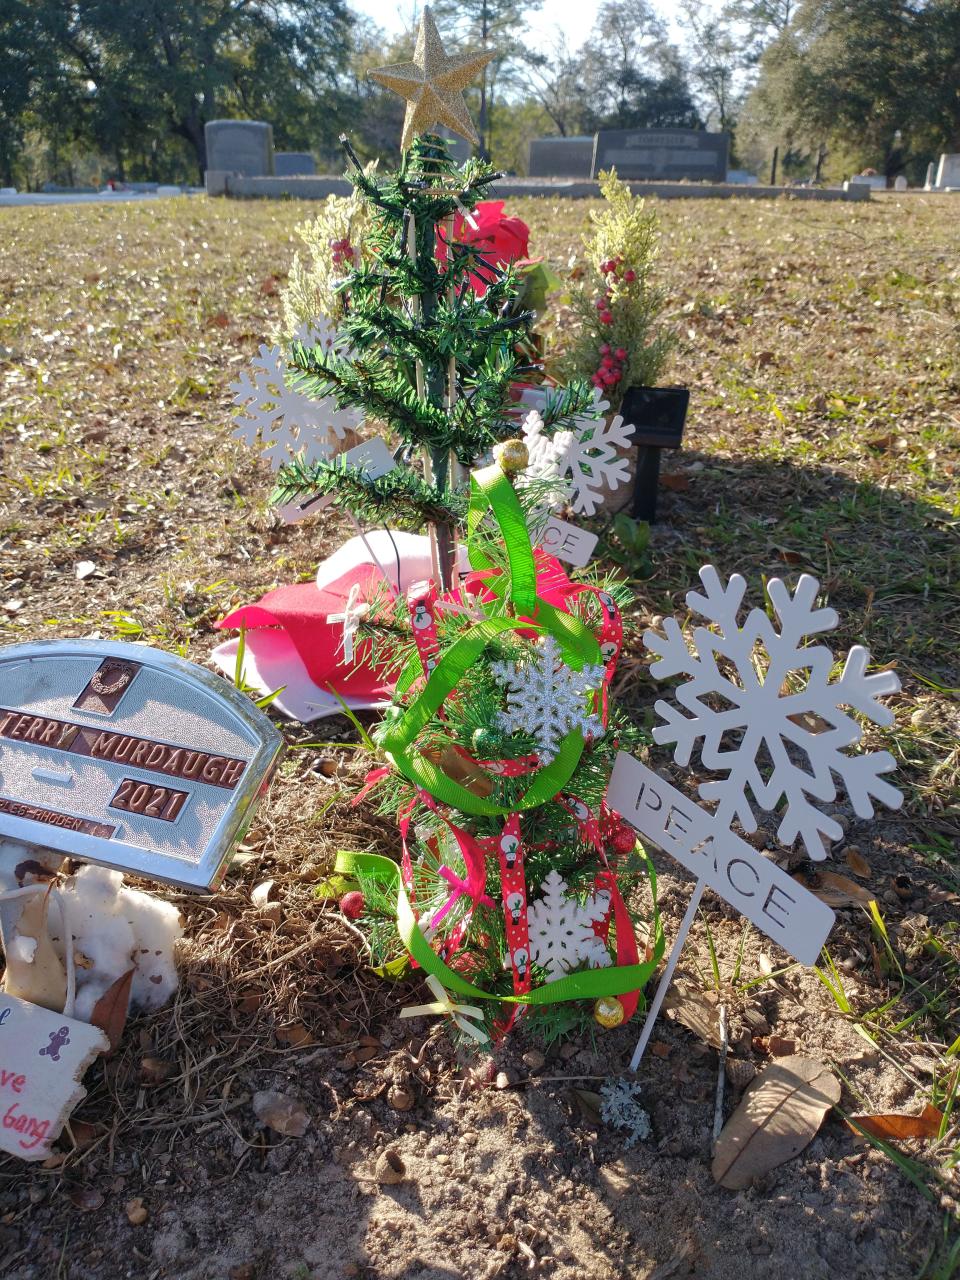 Christmas trees and trinkets adorn the gravesites of Maggie and Paul Murdaugh, murdered two Christmases ago in June of 2021.